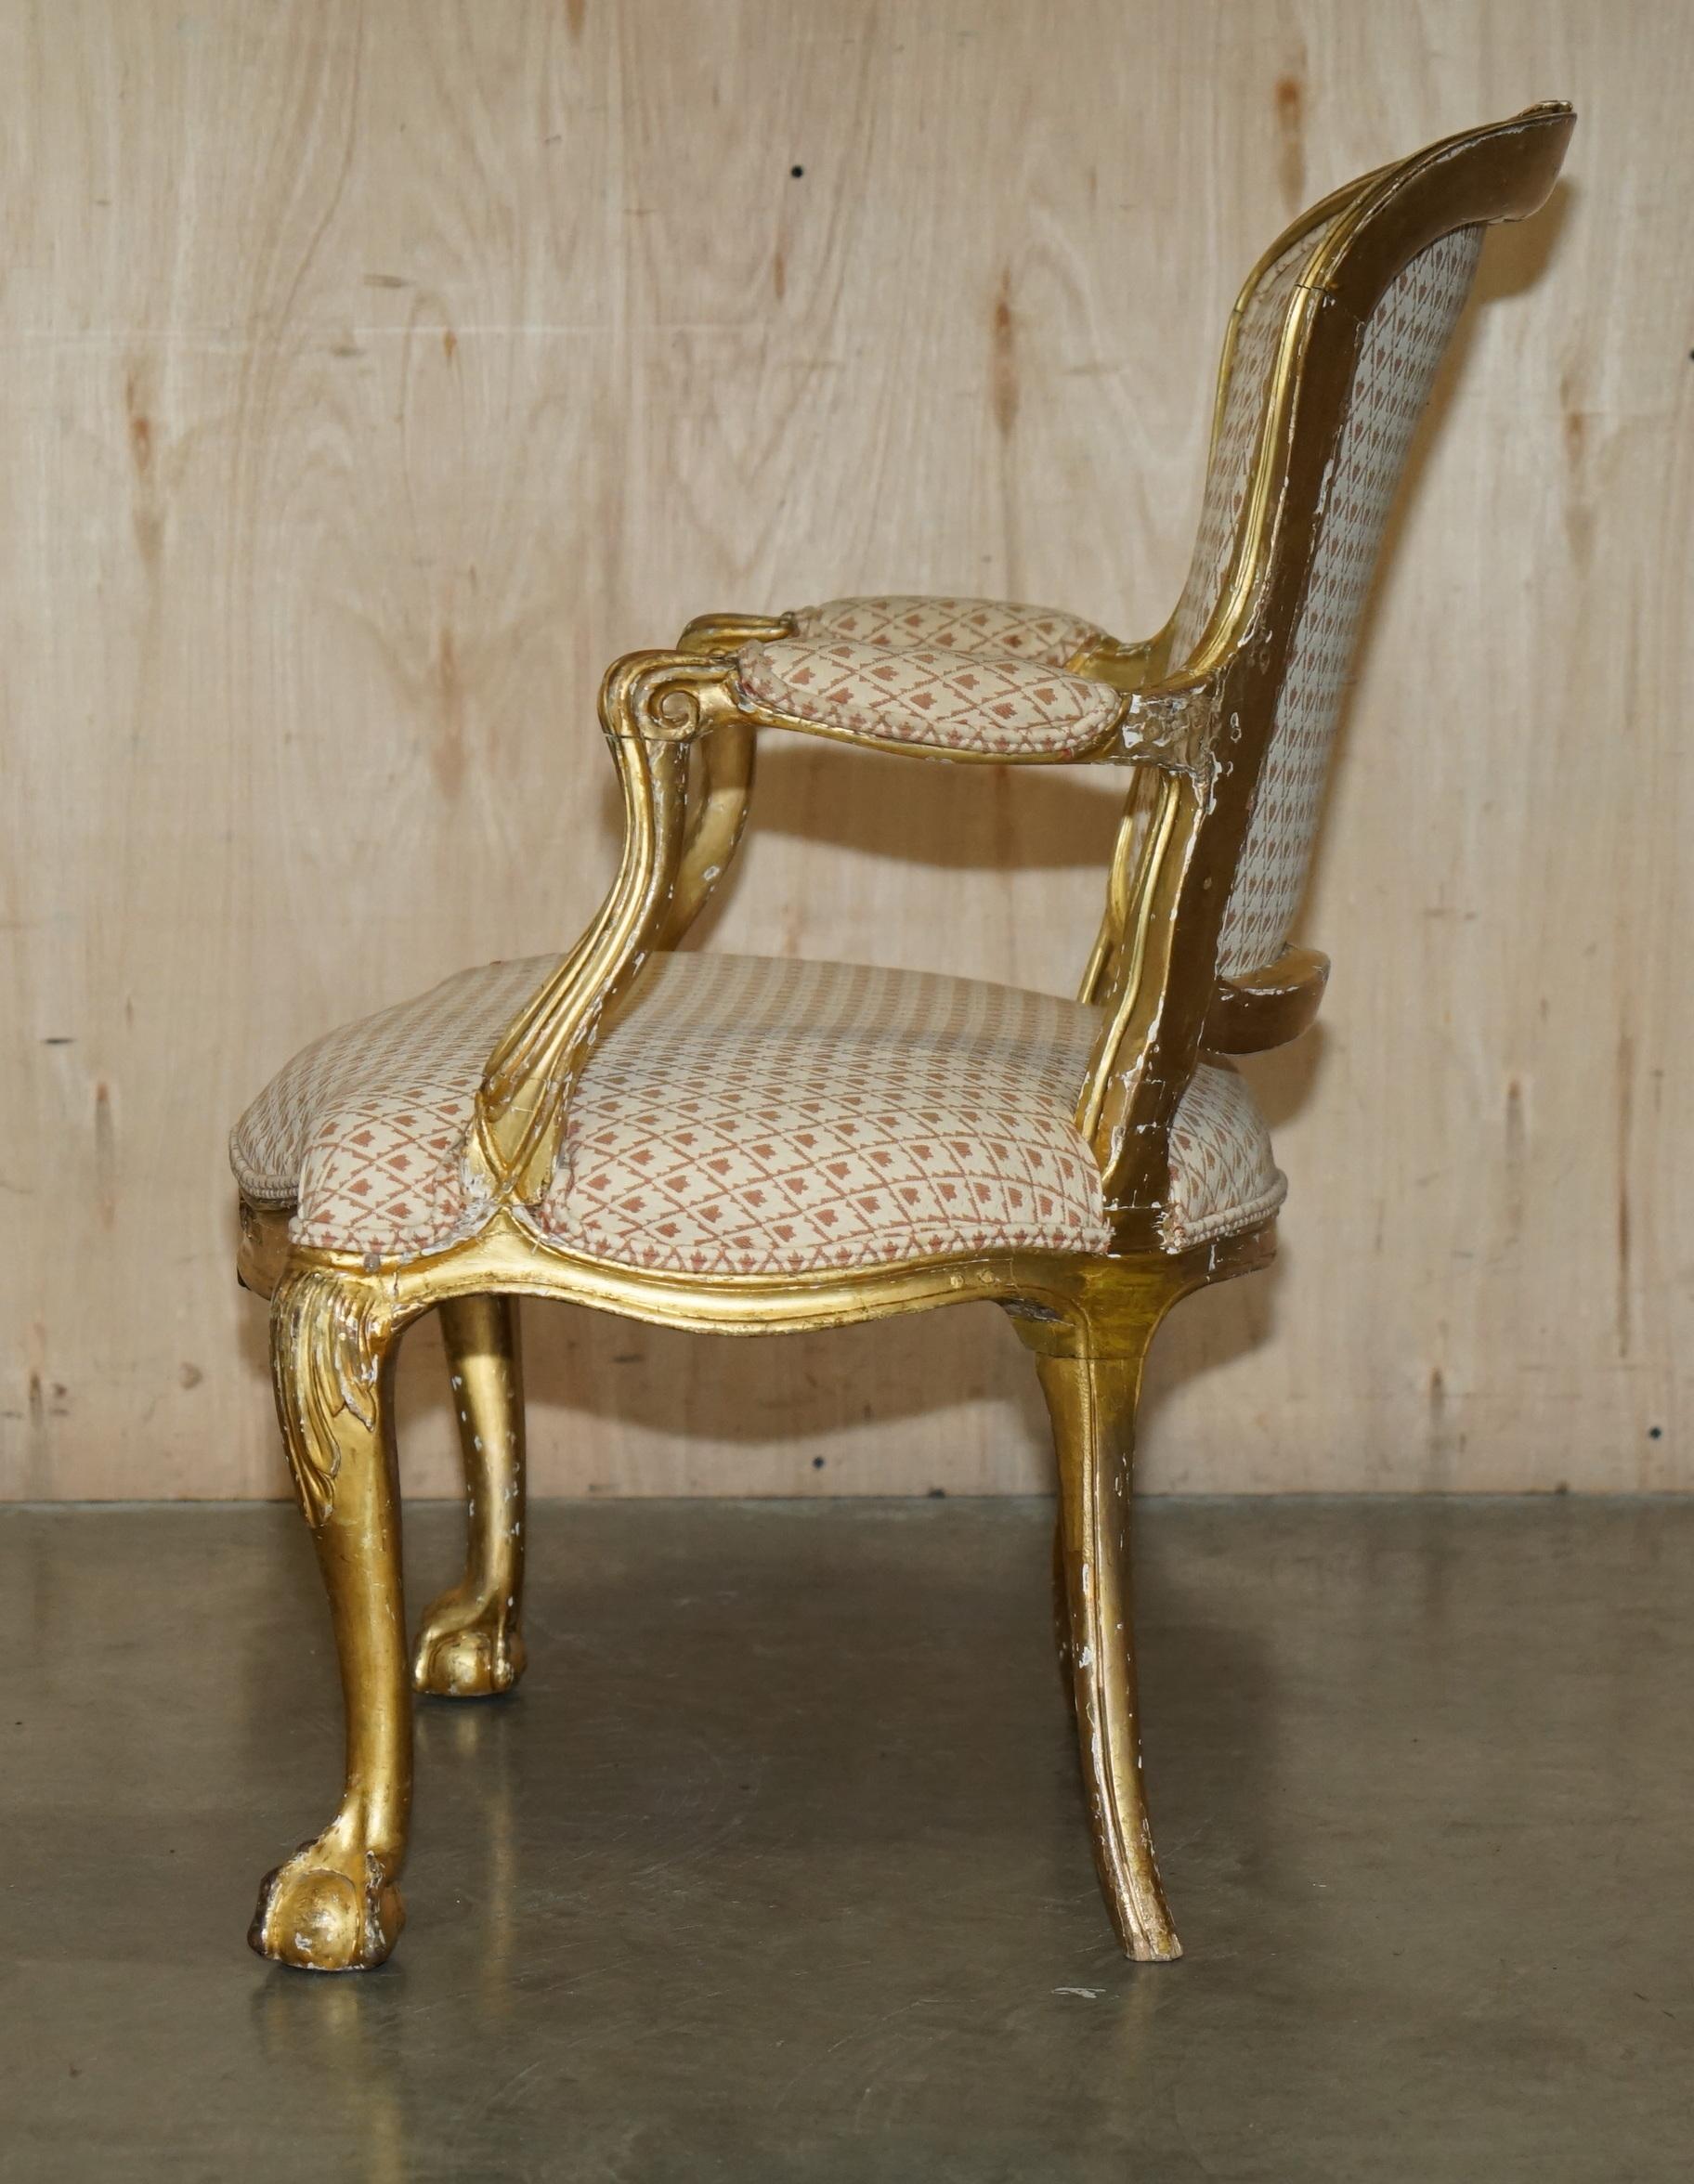 FINE GOLD GILTWOOD 18TH CENTURY CLAW & BALL FEET CARVED ANTIQUE BERGERE ARMCHAiR For Sale 11